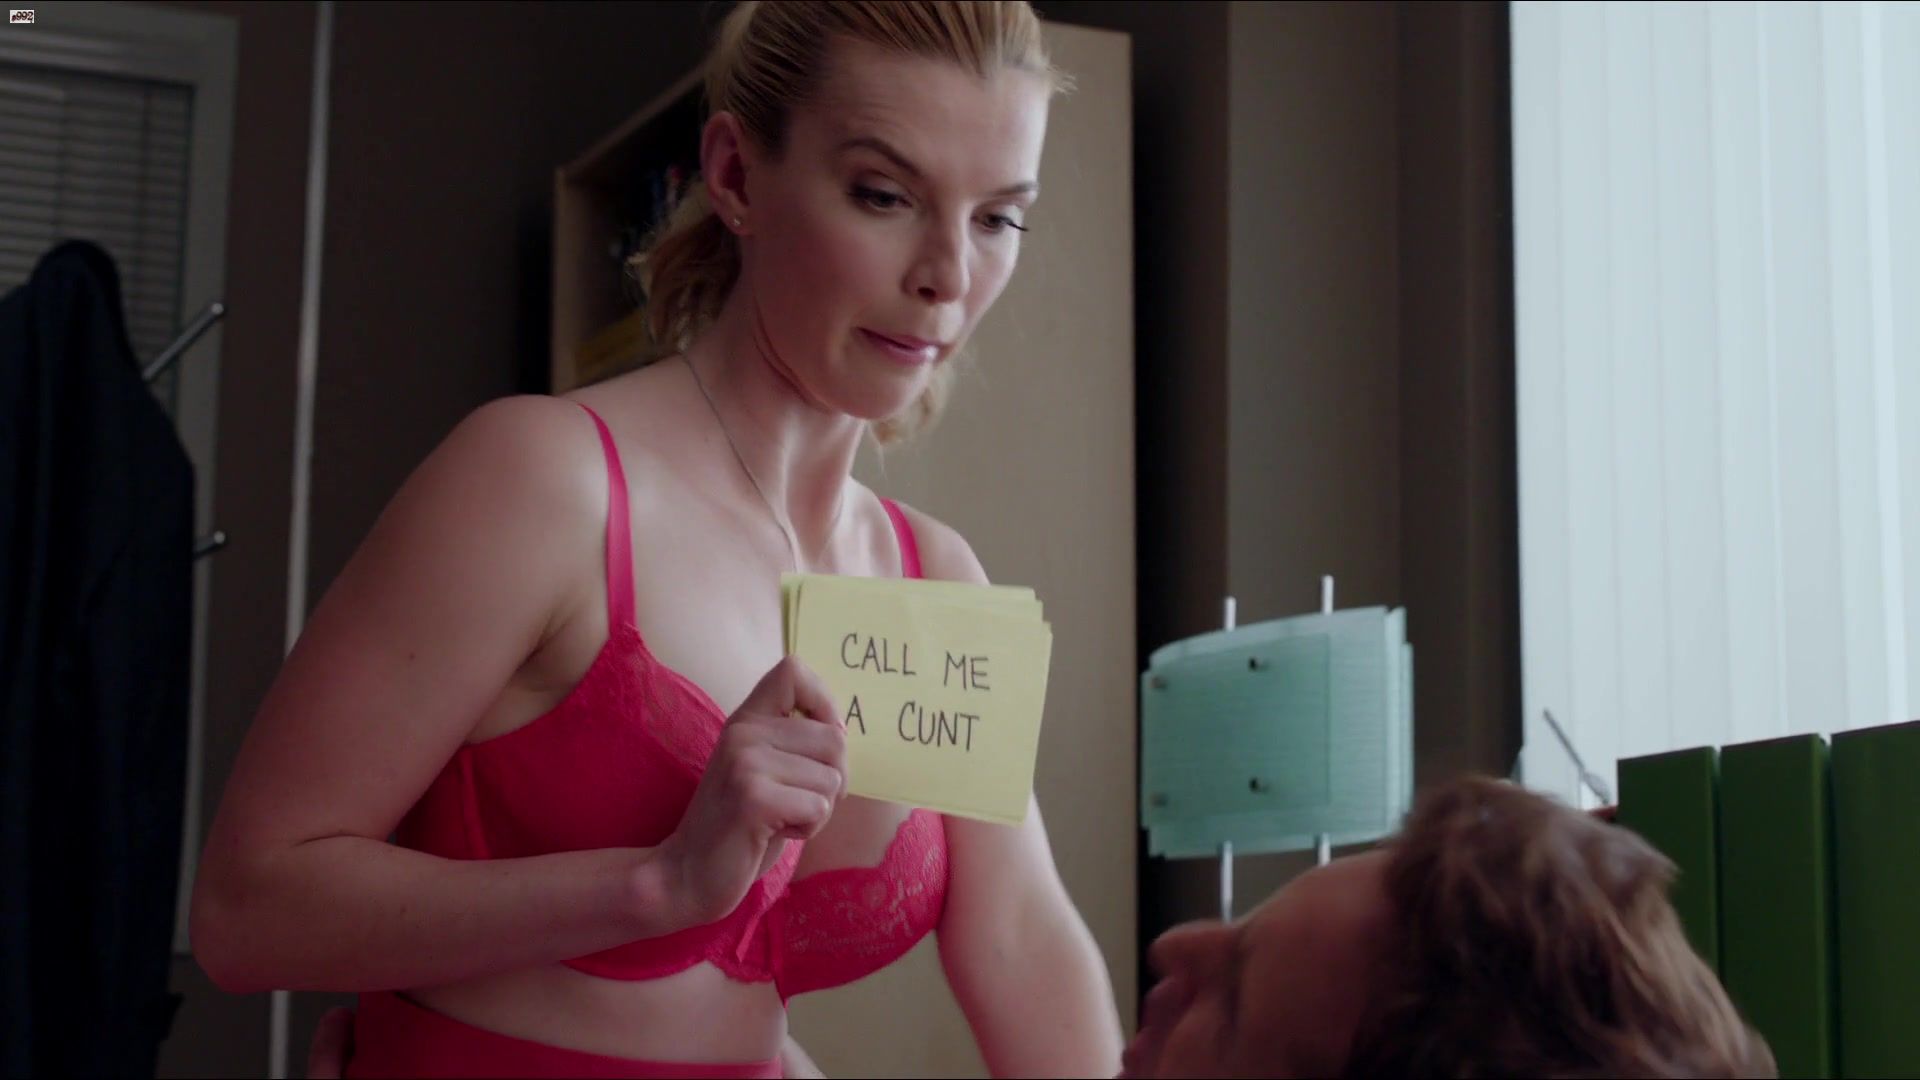 Fucks Betty Gilpin topless cowgirl scene of the TV show "Nurse Jackie" Athletic - 1